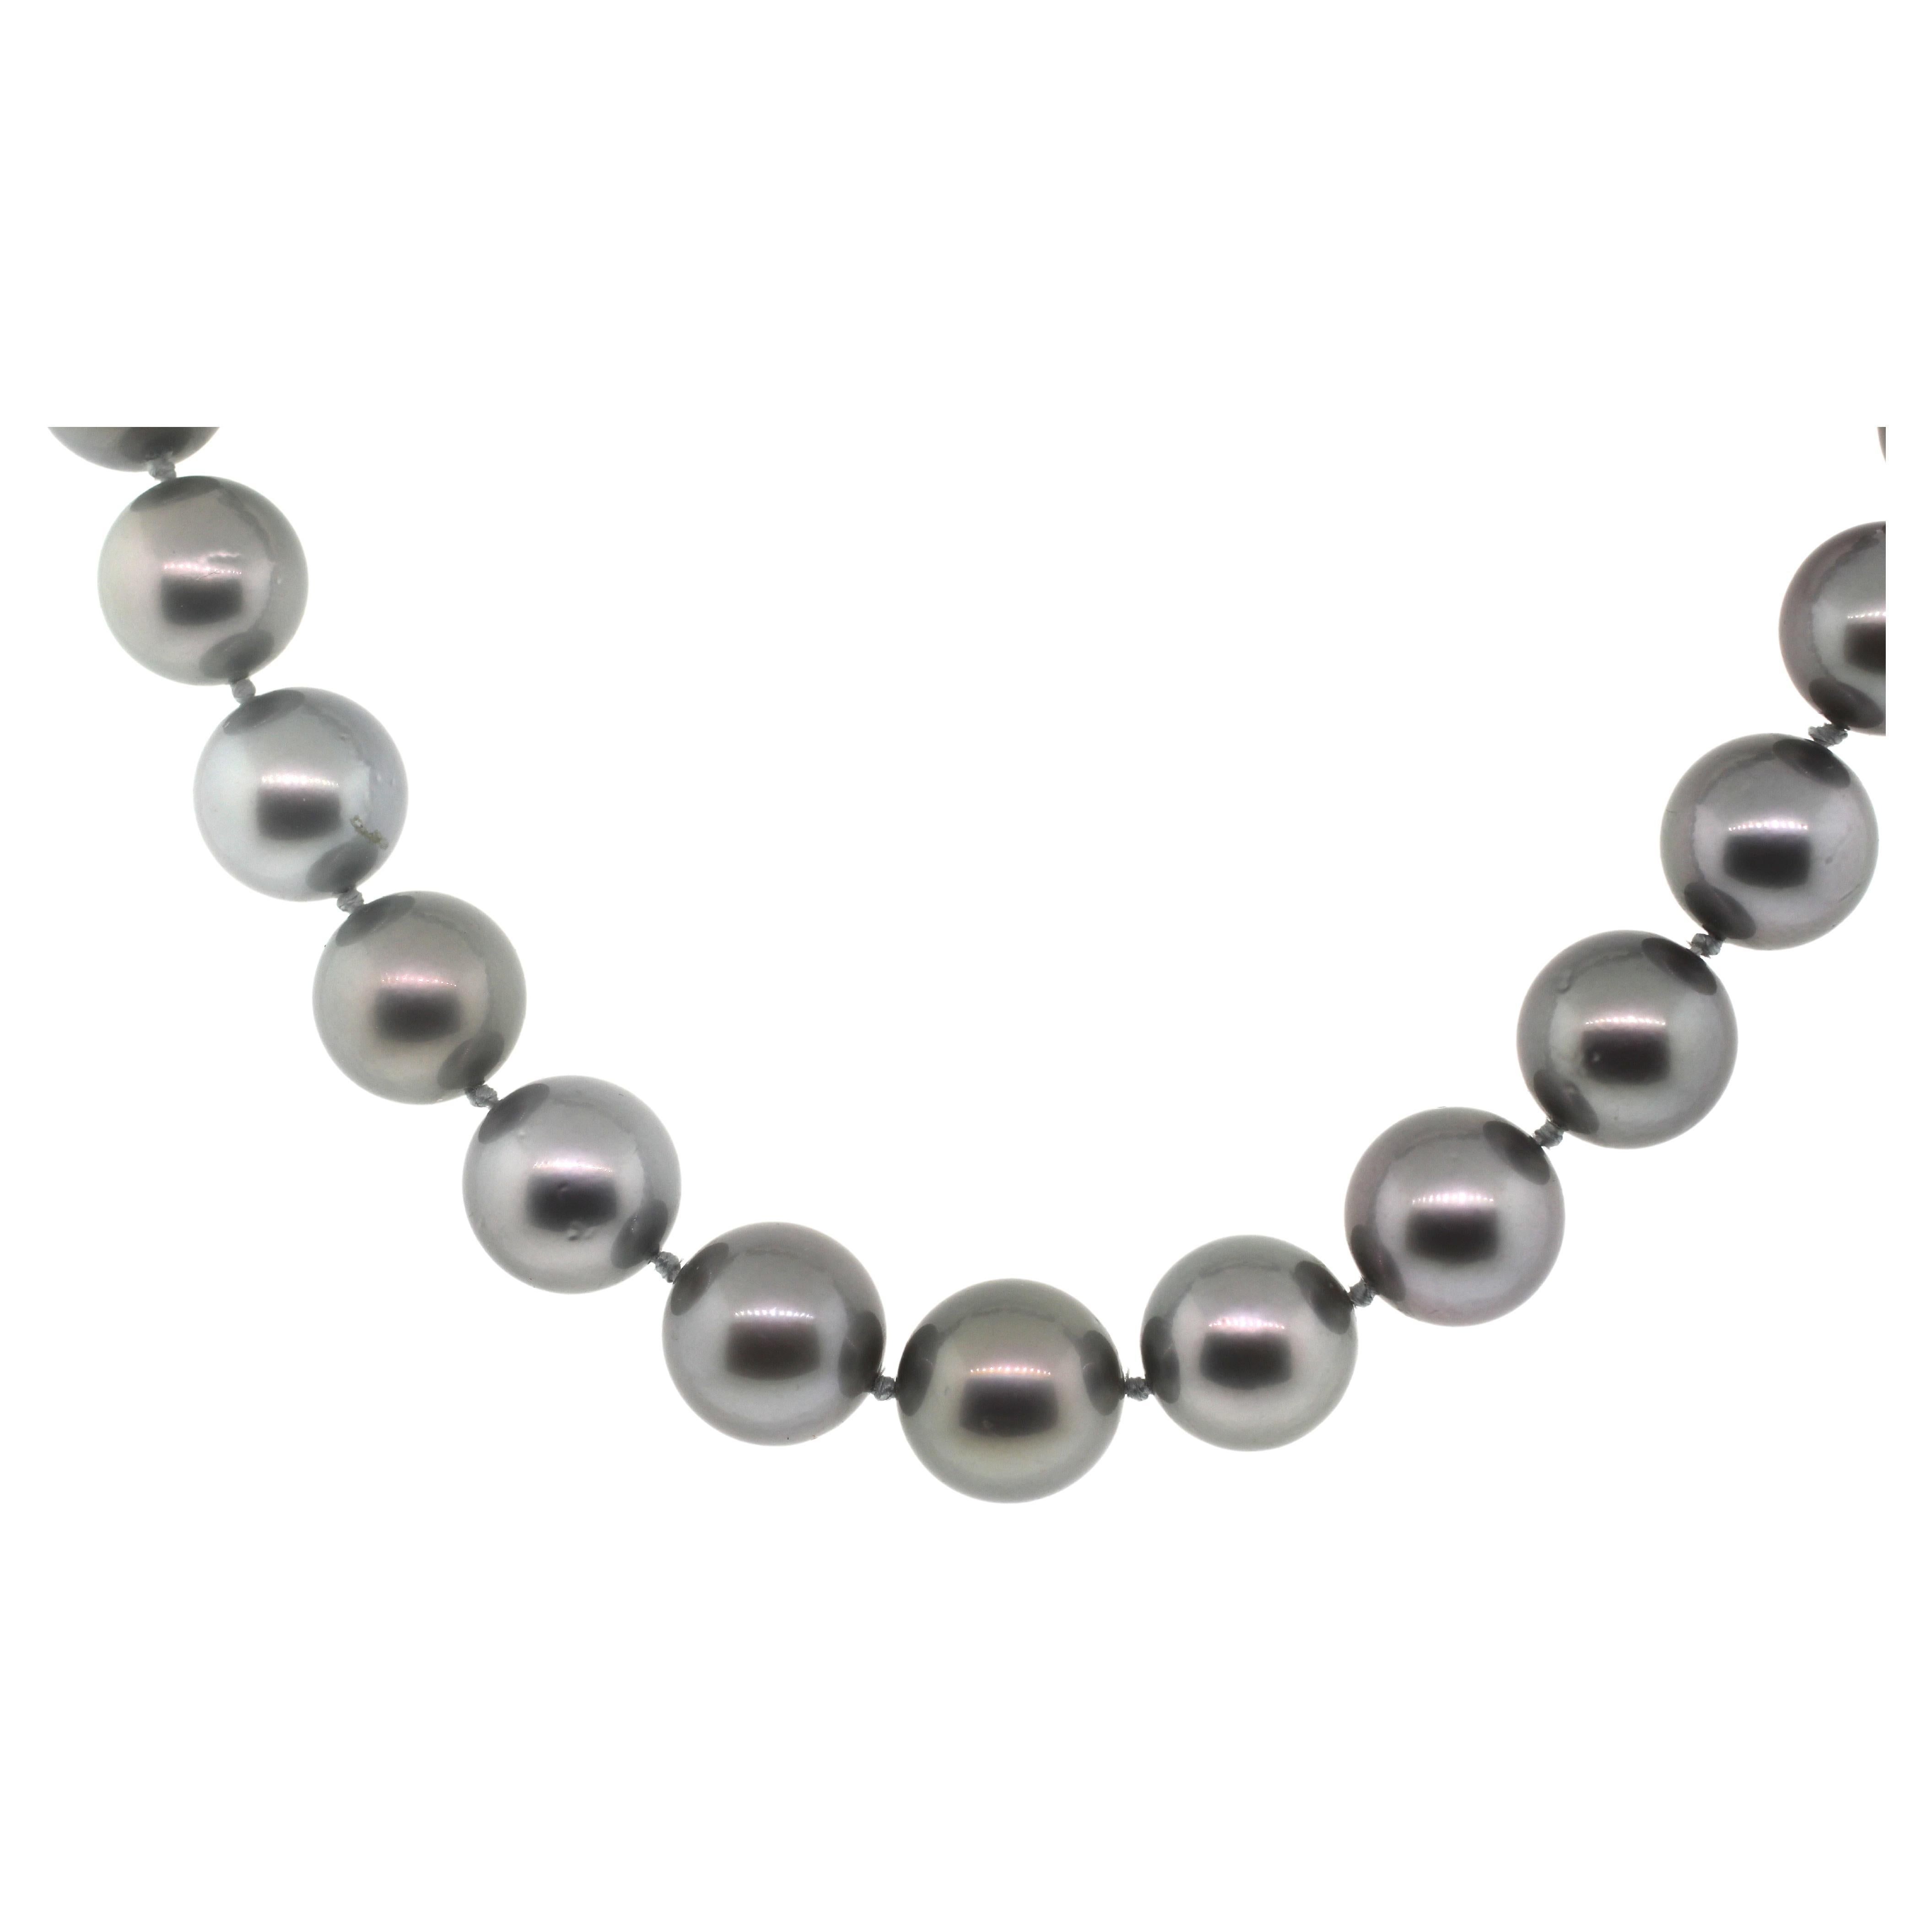 Hakimoto By Jewel Of Ocean Tahitian Gray South Sea Pearl Necklace
37 Pearls 14x12 mm 
18K White Gold With 0.12 Carts Diamond Clasp
21.5